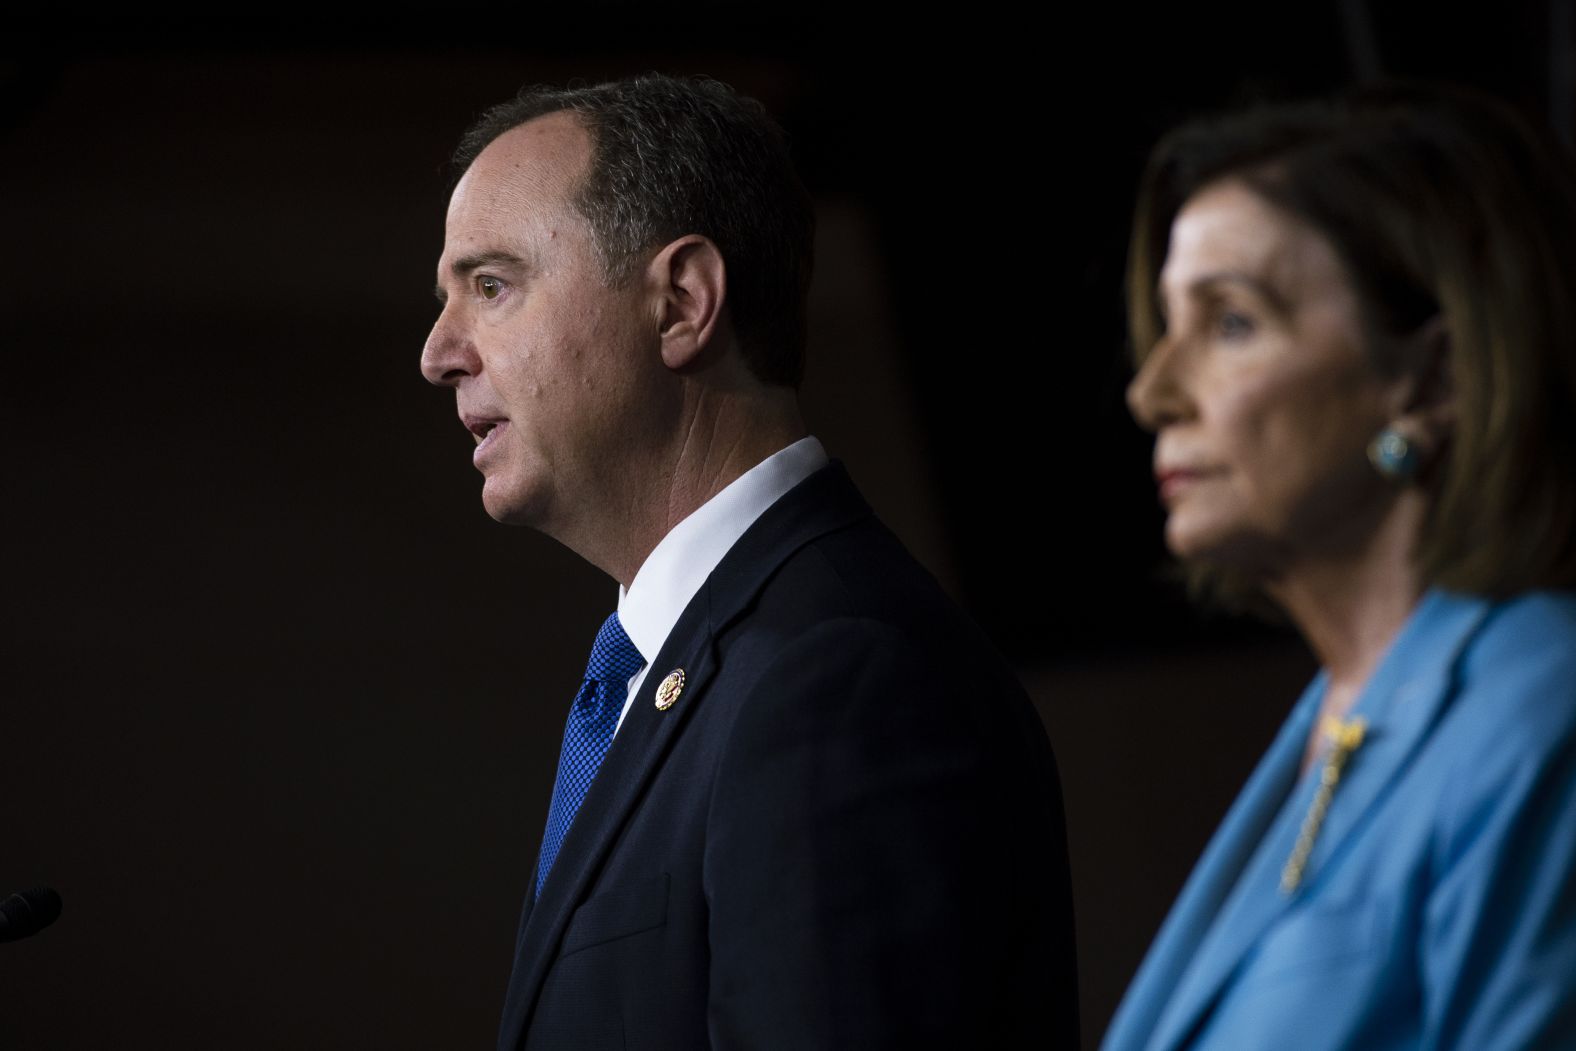 Schiff and Pelosi attend their news conference on October 2. Pelosi said the impeachment inquiry <a href="index.php?page=&url=https%3A%2F%2Fwww.cnn.com%2Fpolitics%2Flive-news%2Ftrump-impeachment-inquiry-10-02-2019%2Fh_c846ab6b42ba56cd77ea55d32bd60d6e" target="_blank">is "not anything to be joyful about"</a> and called this a "sad time for the American people." She said that the House had "no choice but to go forward" with the proceedings.